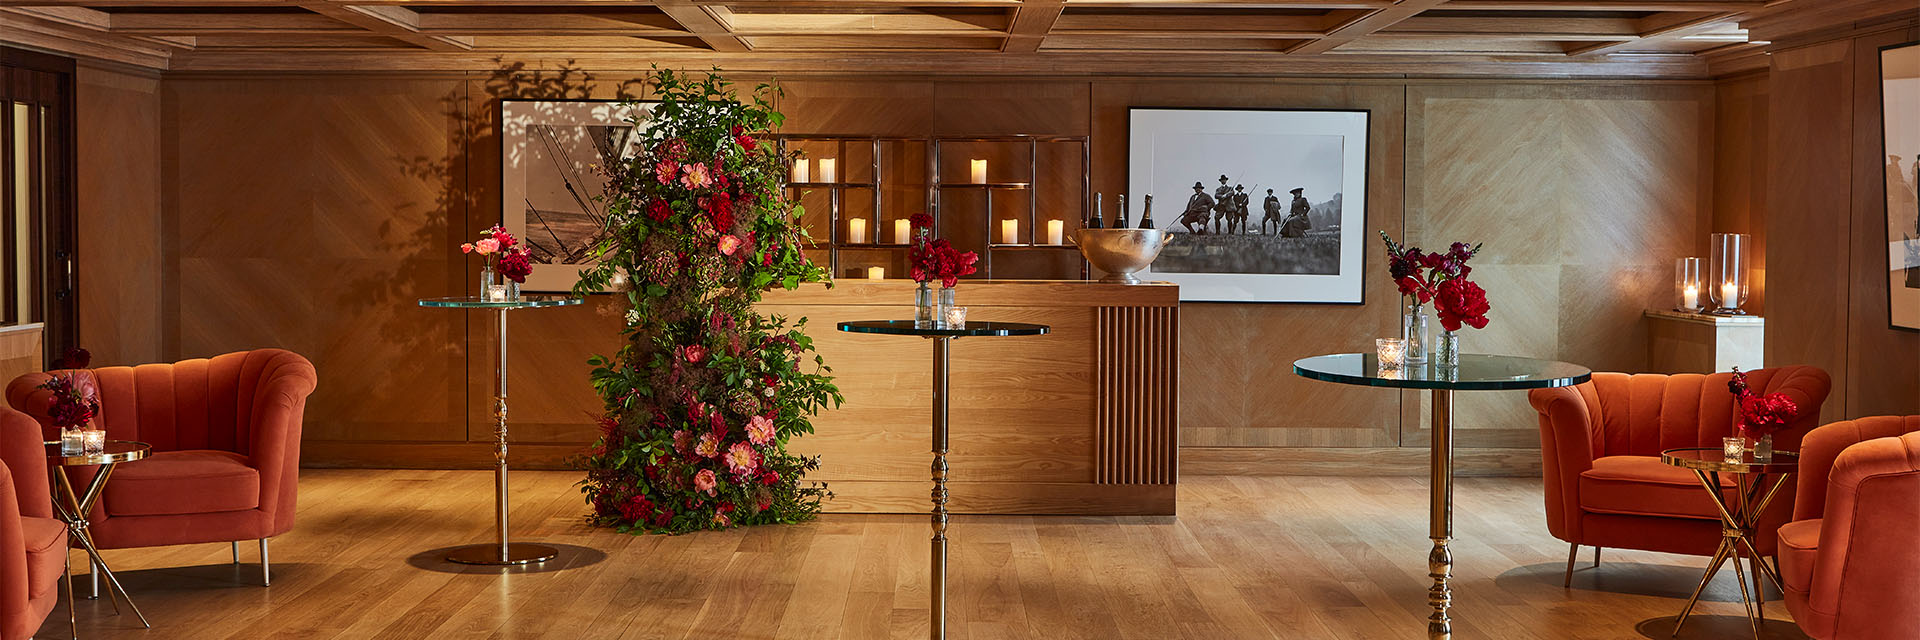 Event room with wooden floor, walls and ceiling, with a couple of small high tables with glass tops/ At the back is a bar with a floral arrangement and several calendars.